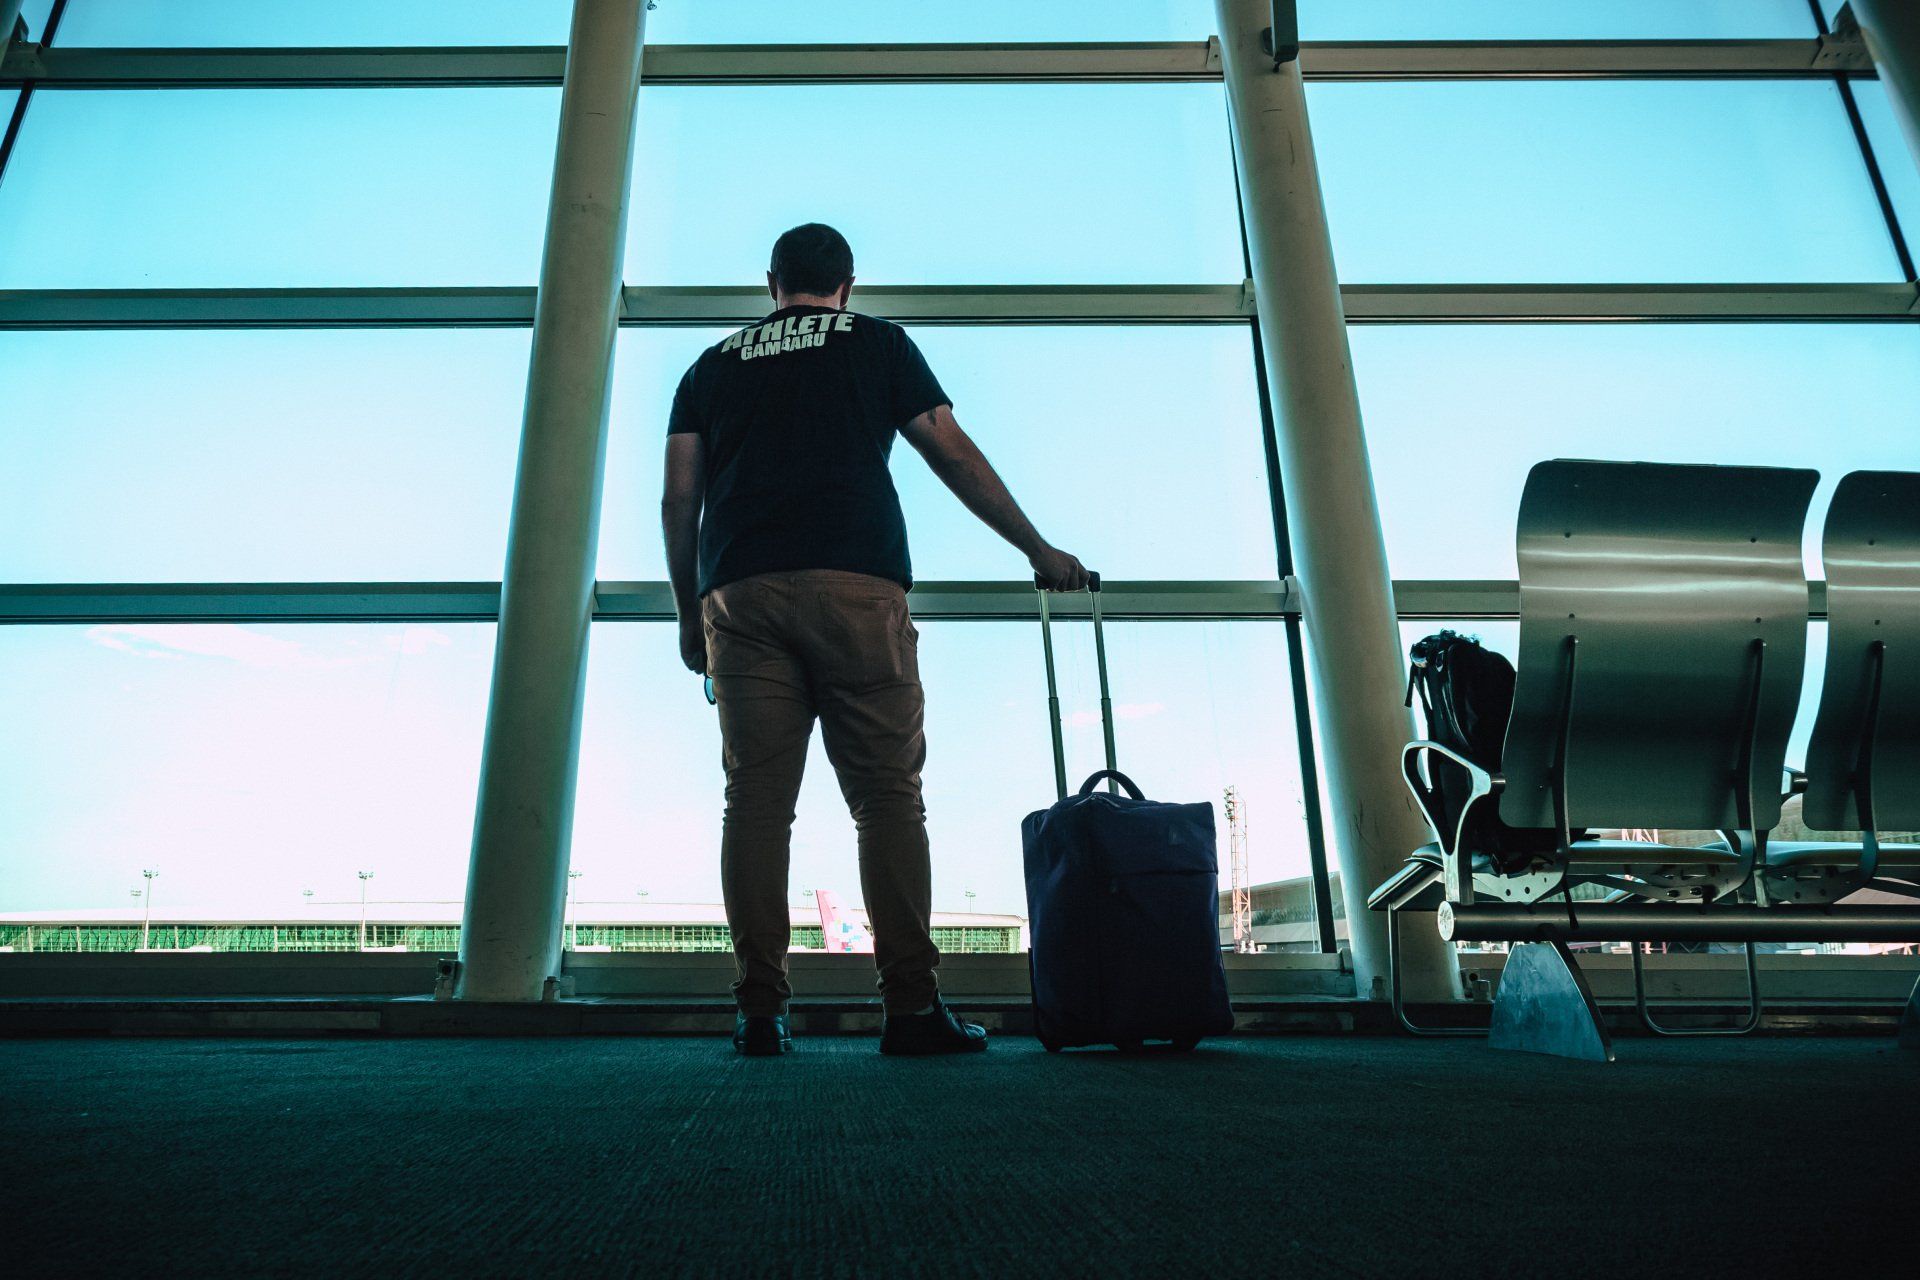 A man with a carry-on suitcase looking out of the floor-to-ceiling window as an airport.